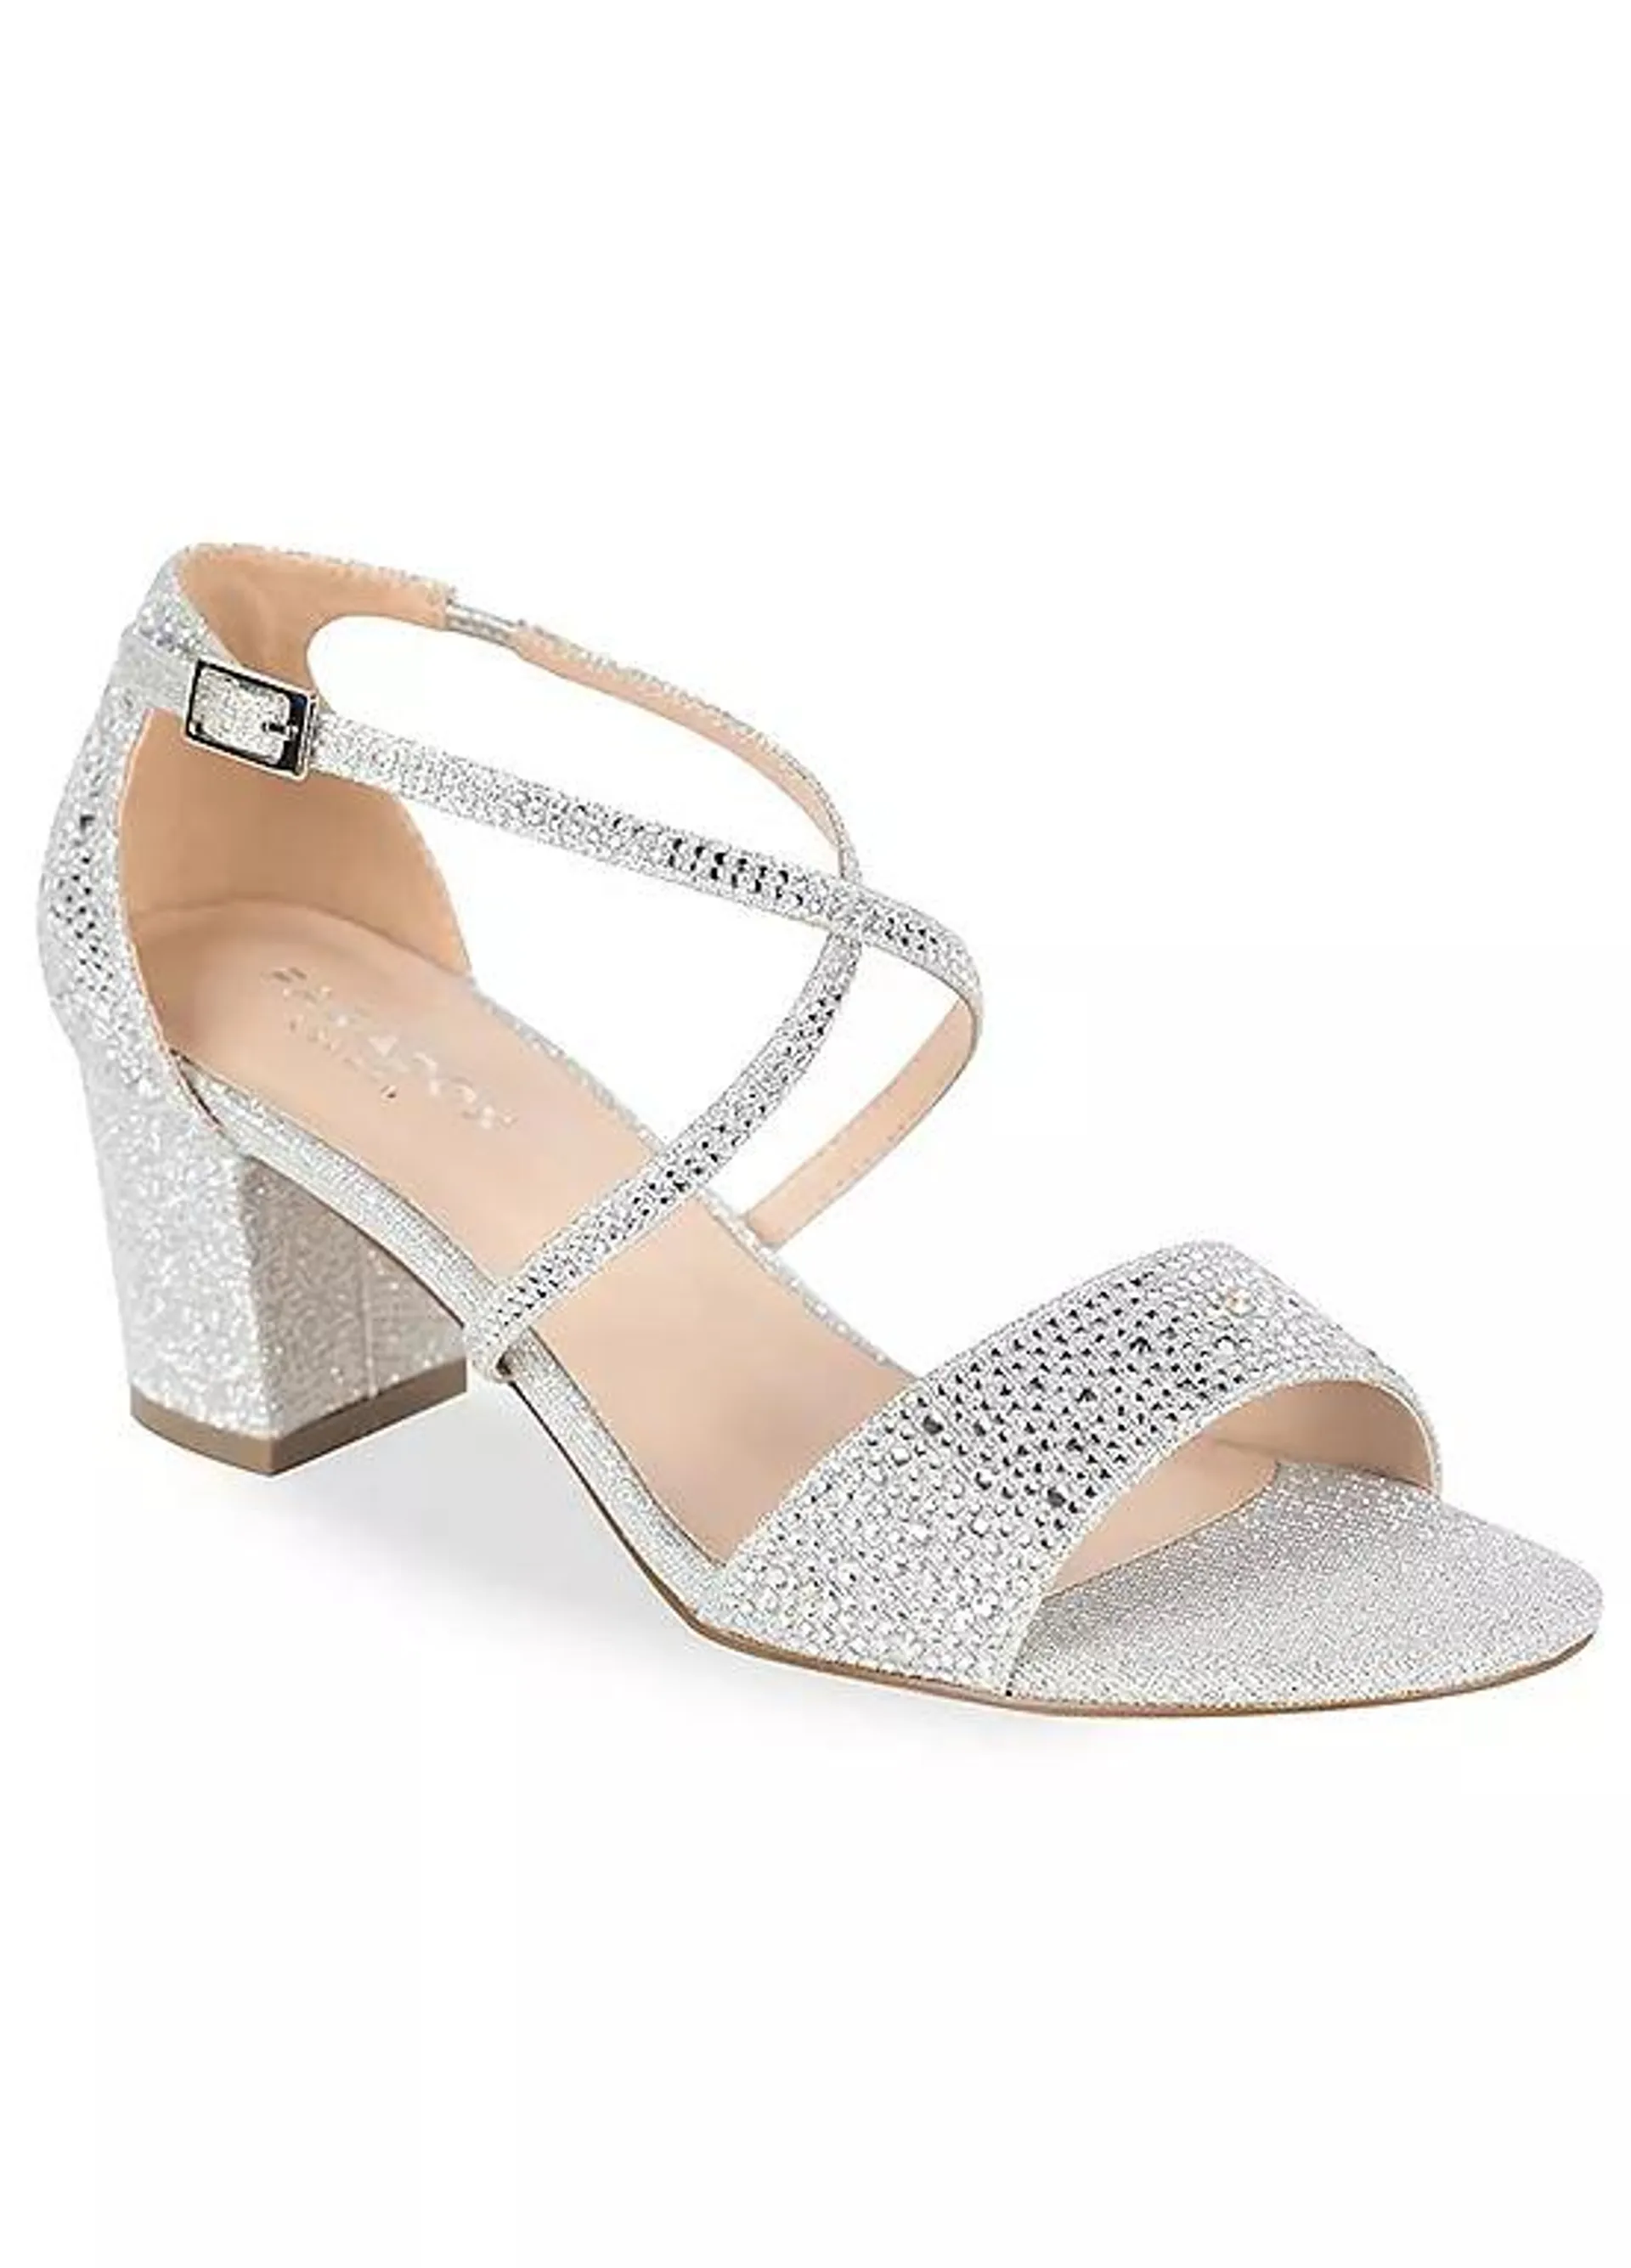 Paradox London Silver Glitter ’Ines’ Mid Block Heel Ankle Strap Sandals